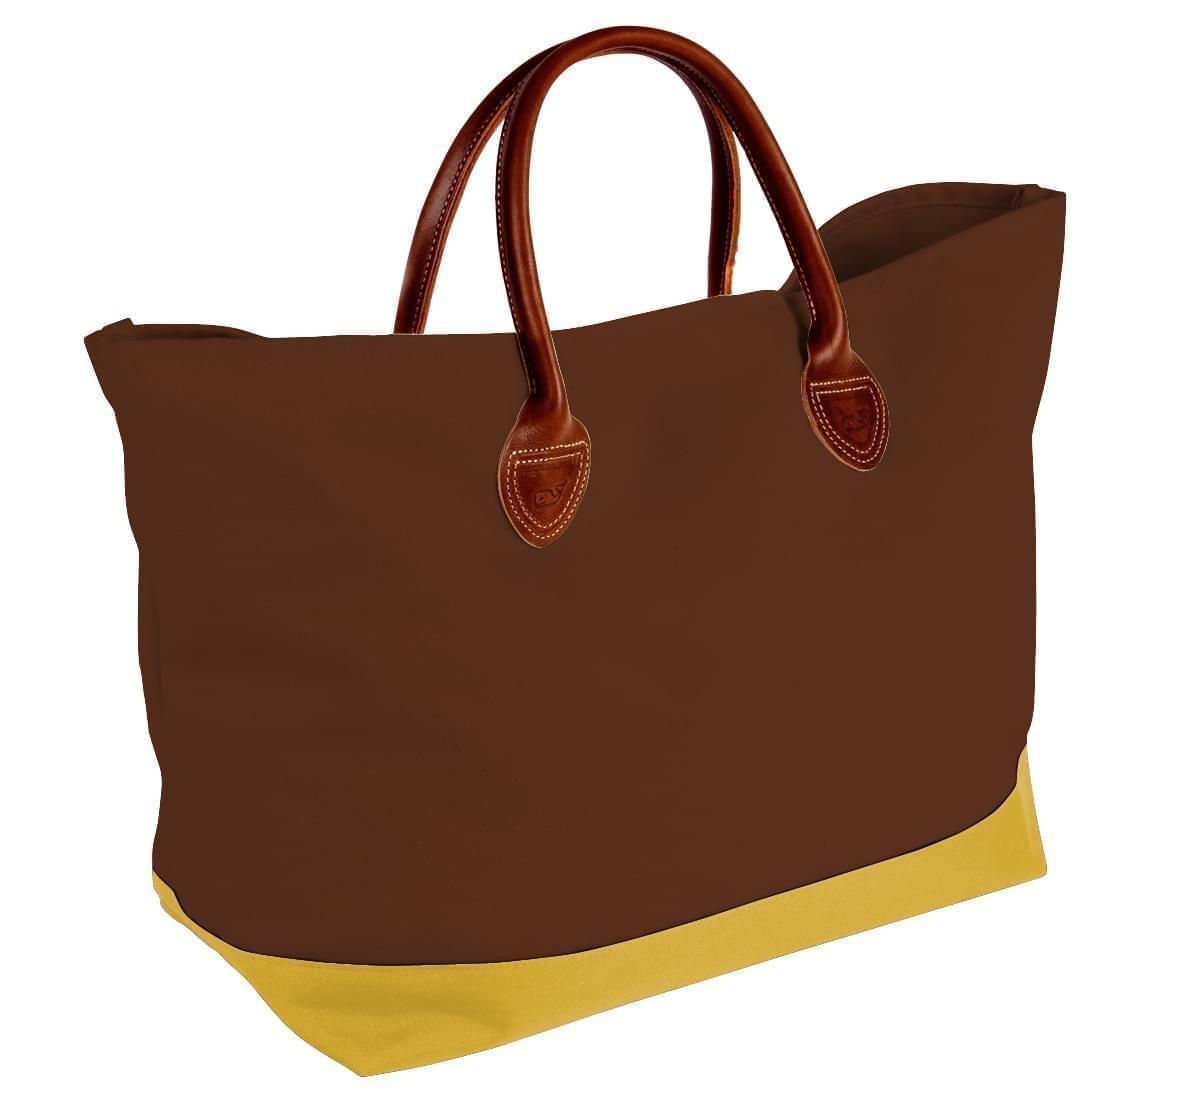 USA Made Canvas Leather Handle Totes, Brown-Gold, 10899-QA9